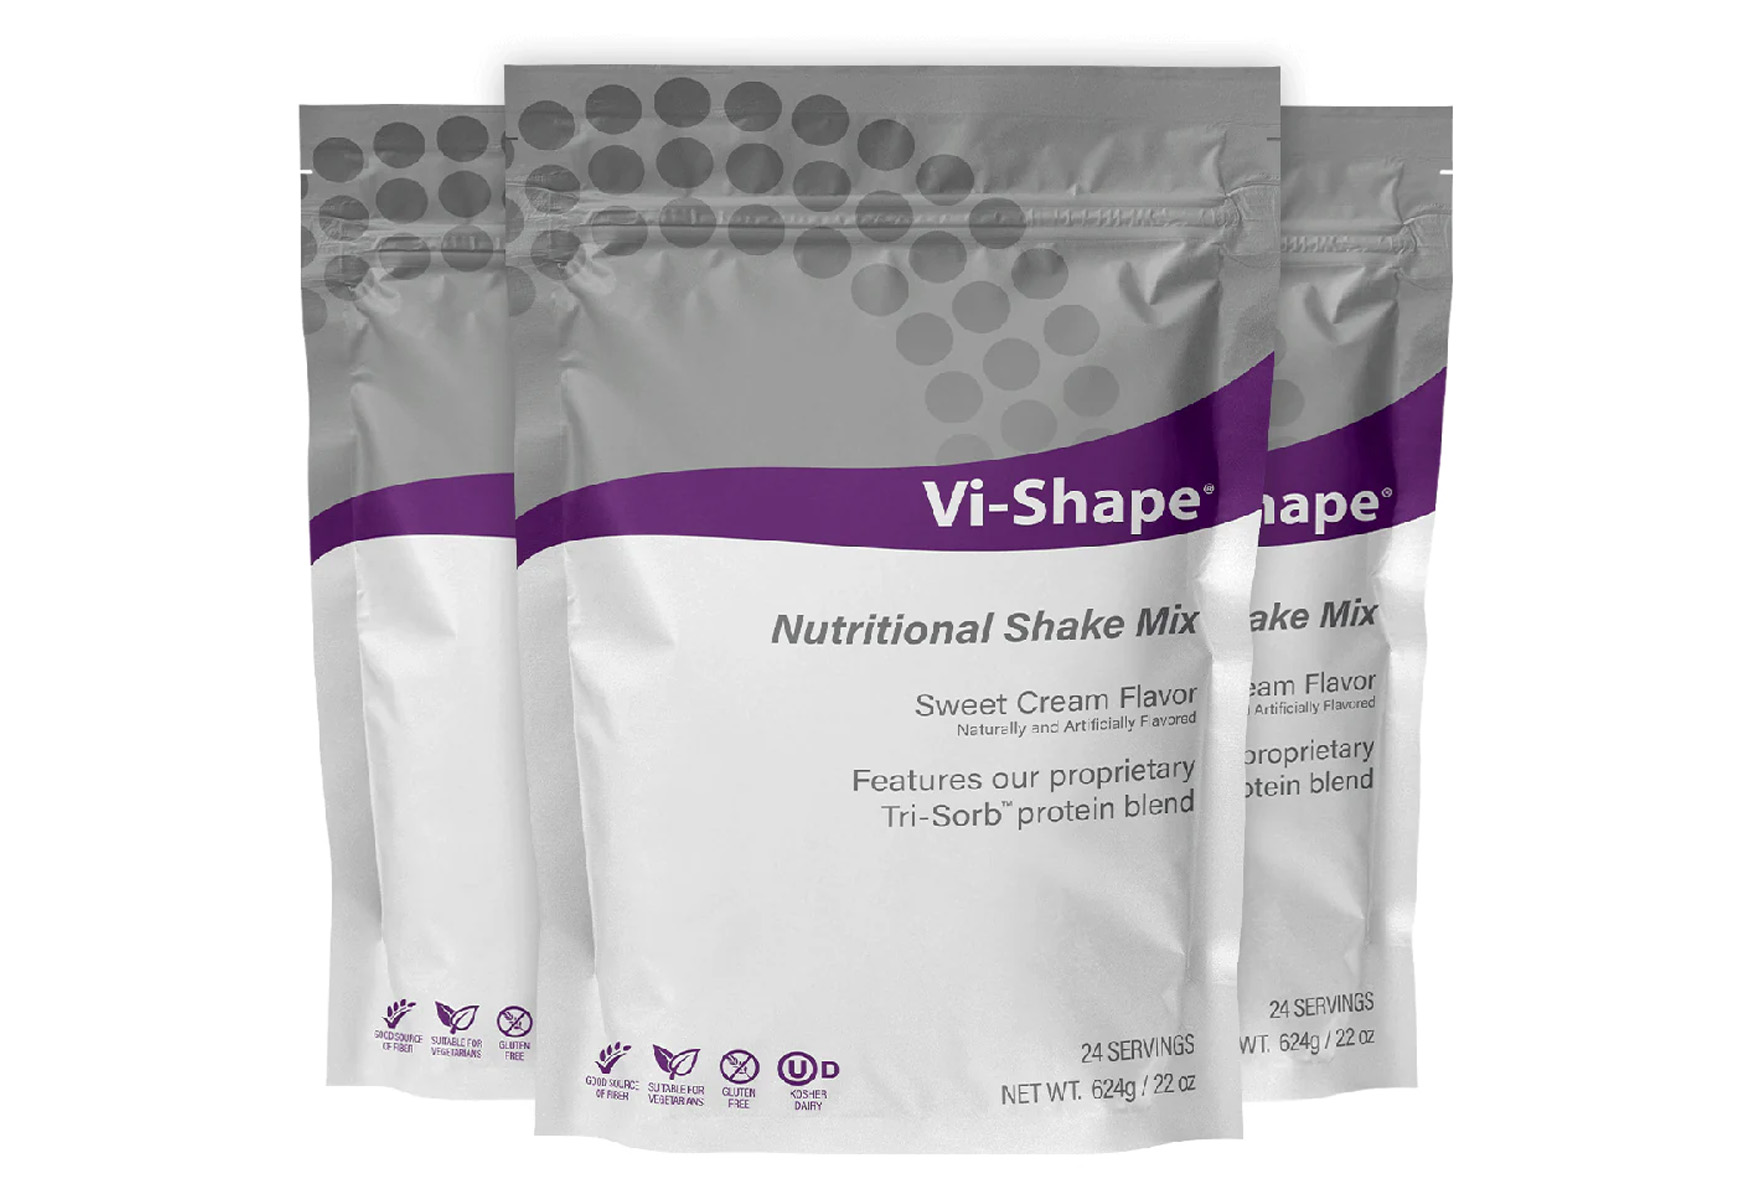 15 Vi Shake Nutrition Facts - Facts.net